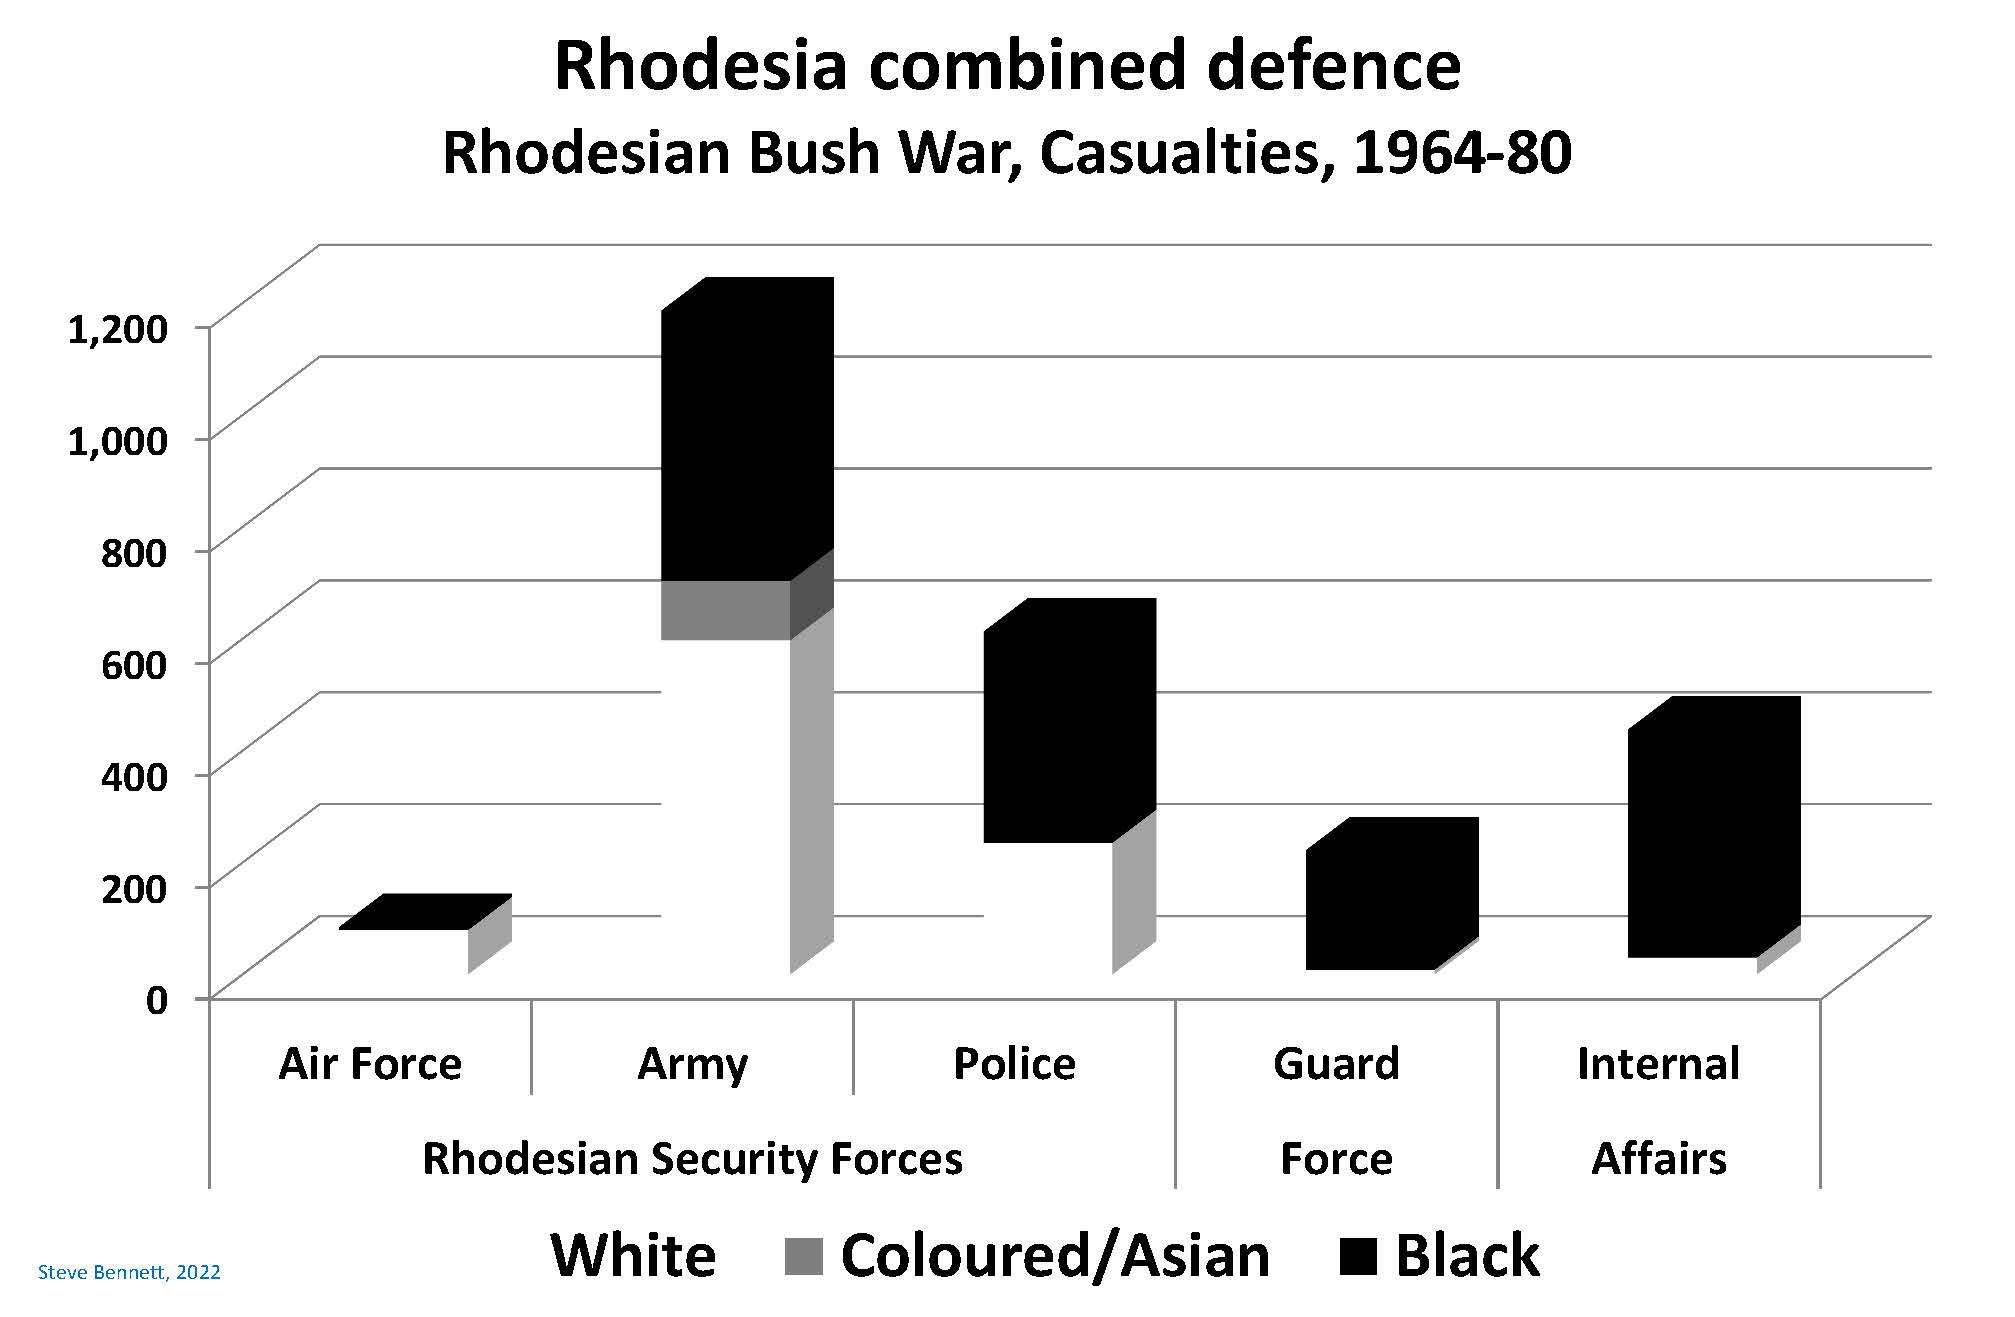 Chart illustrating casualties from air force, army and police in Rhodesian security forces plus Guard Force and internal affairs during the Rhodesian bush war